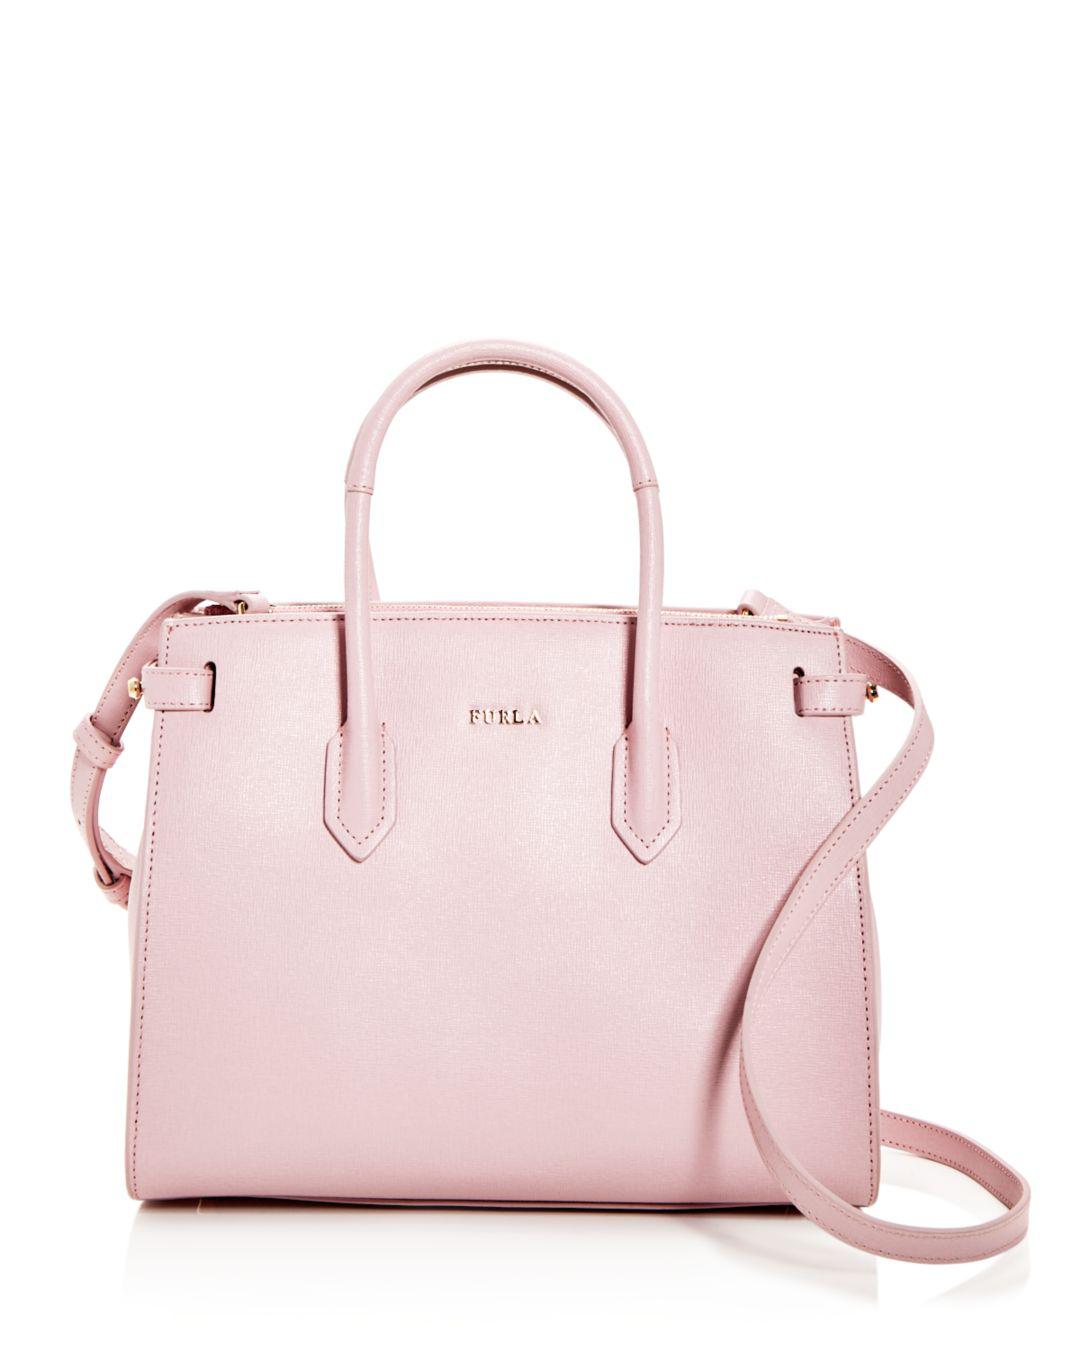 Furla Pin Small East/west Embossed Leather Satchel in Pink - Lyst